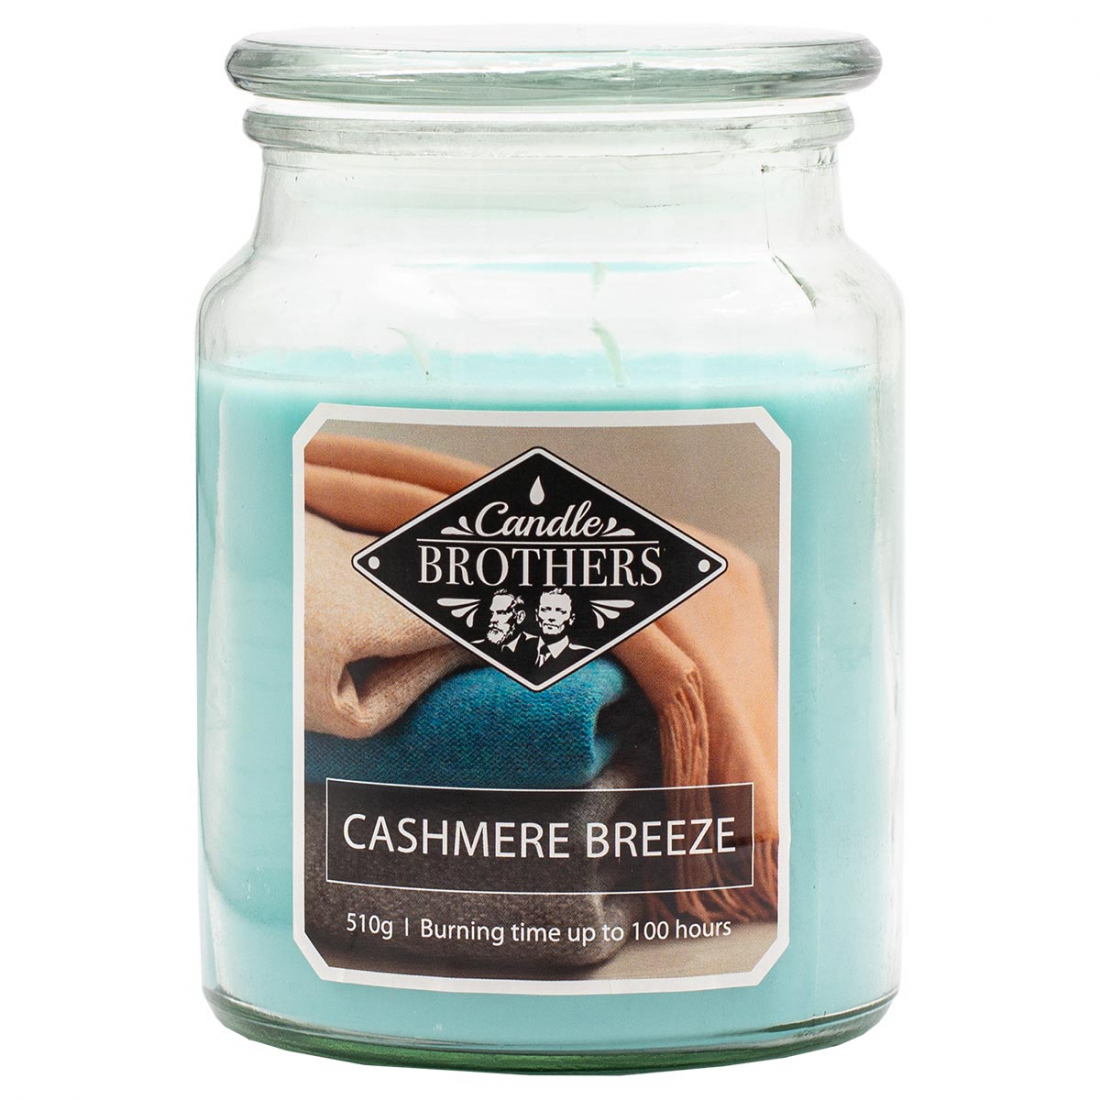 'Cashmere Breeze' 2 Wicks Candle - 510 g